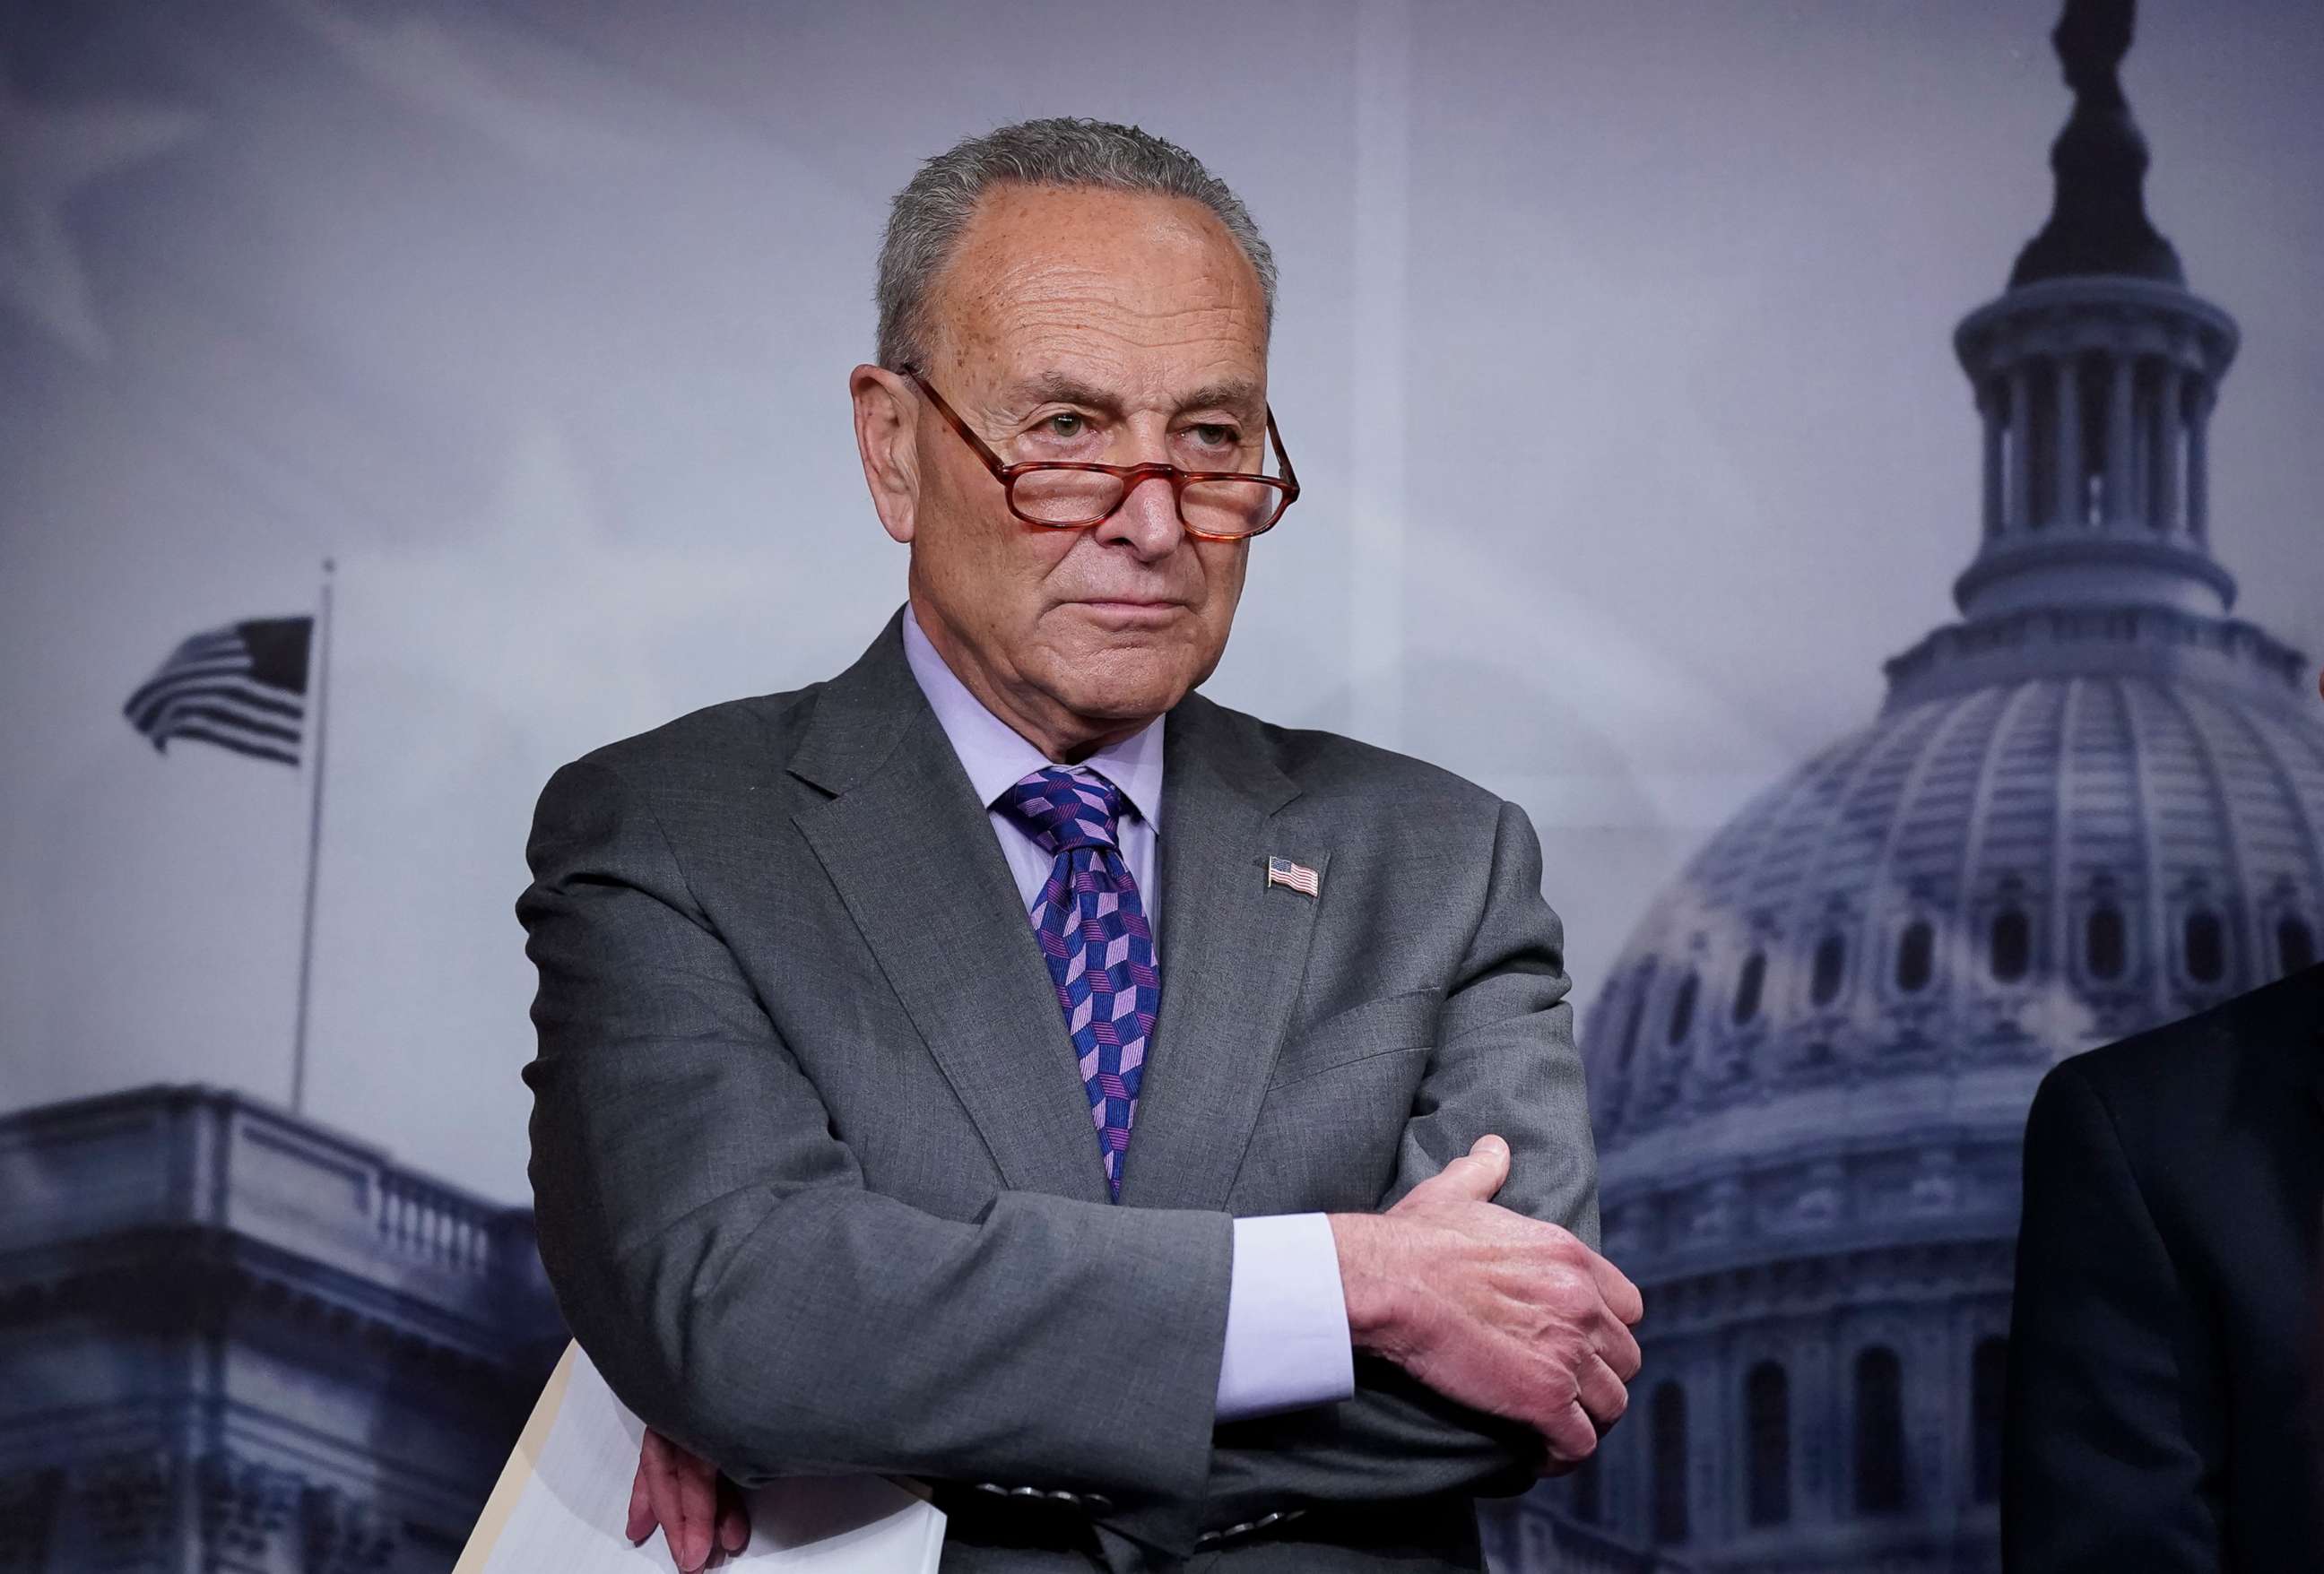 PHOTO: Senate Majority Leader Chuck Schumer listens during a news conference following a closed-door caucus lunch, at the Capitol in Washington, July 19, 2022.